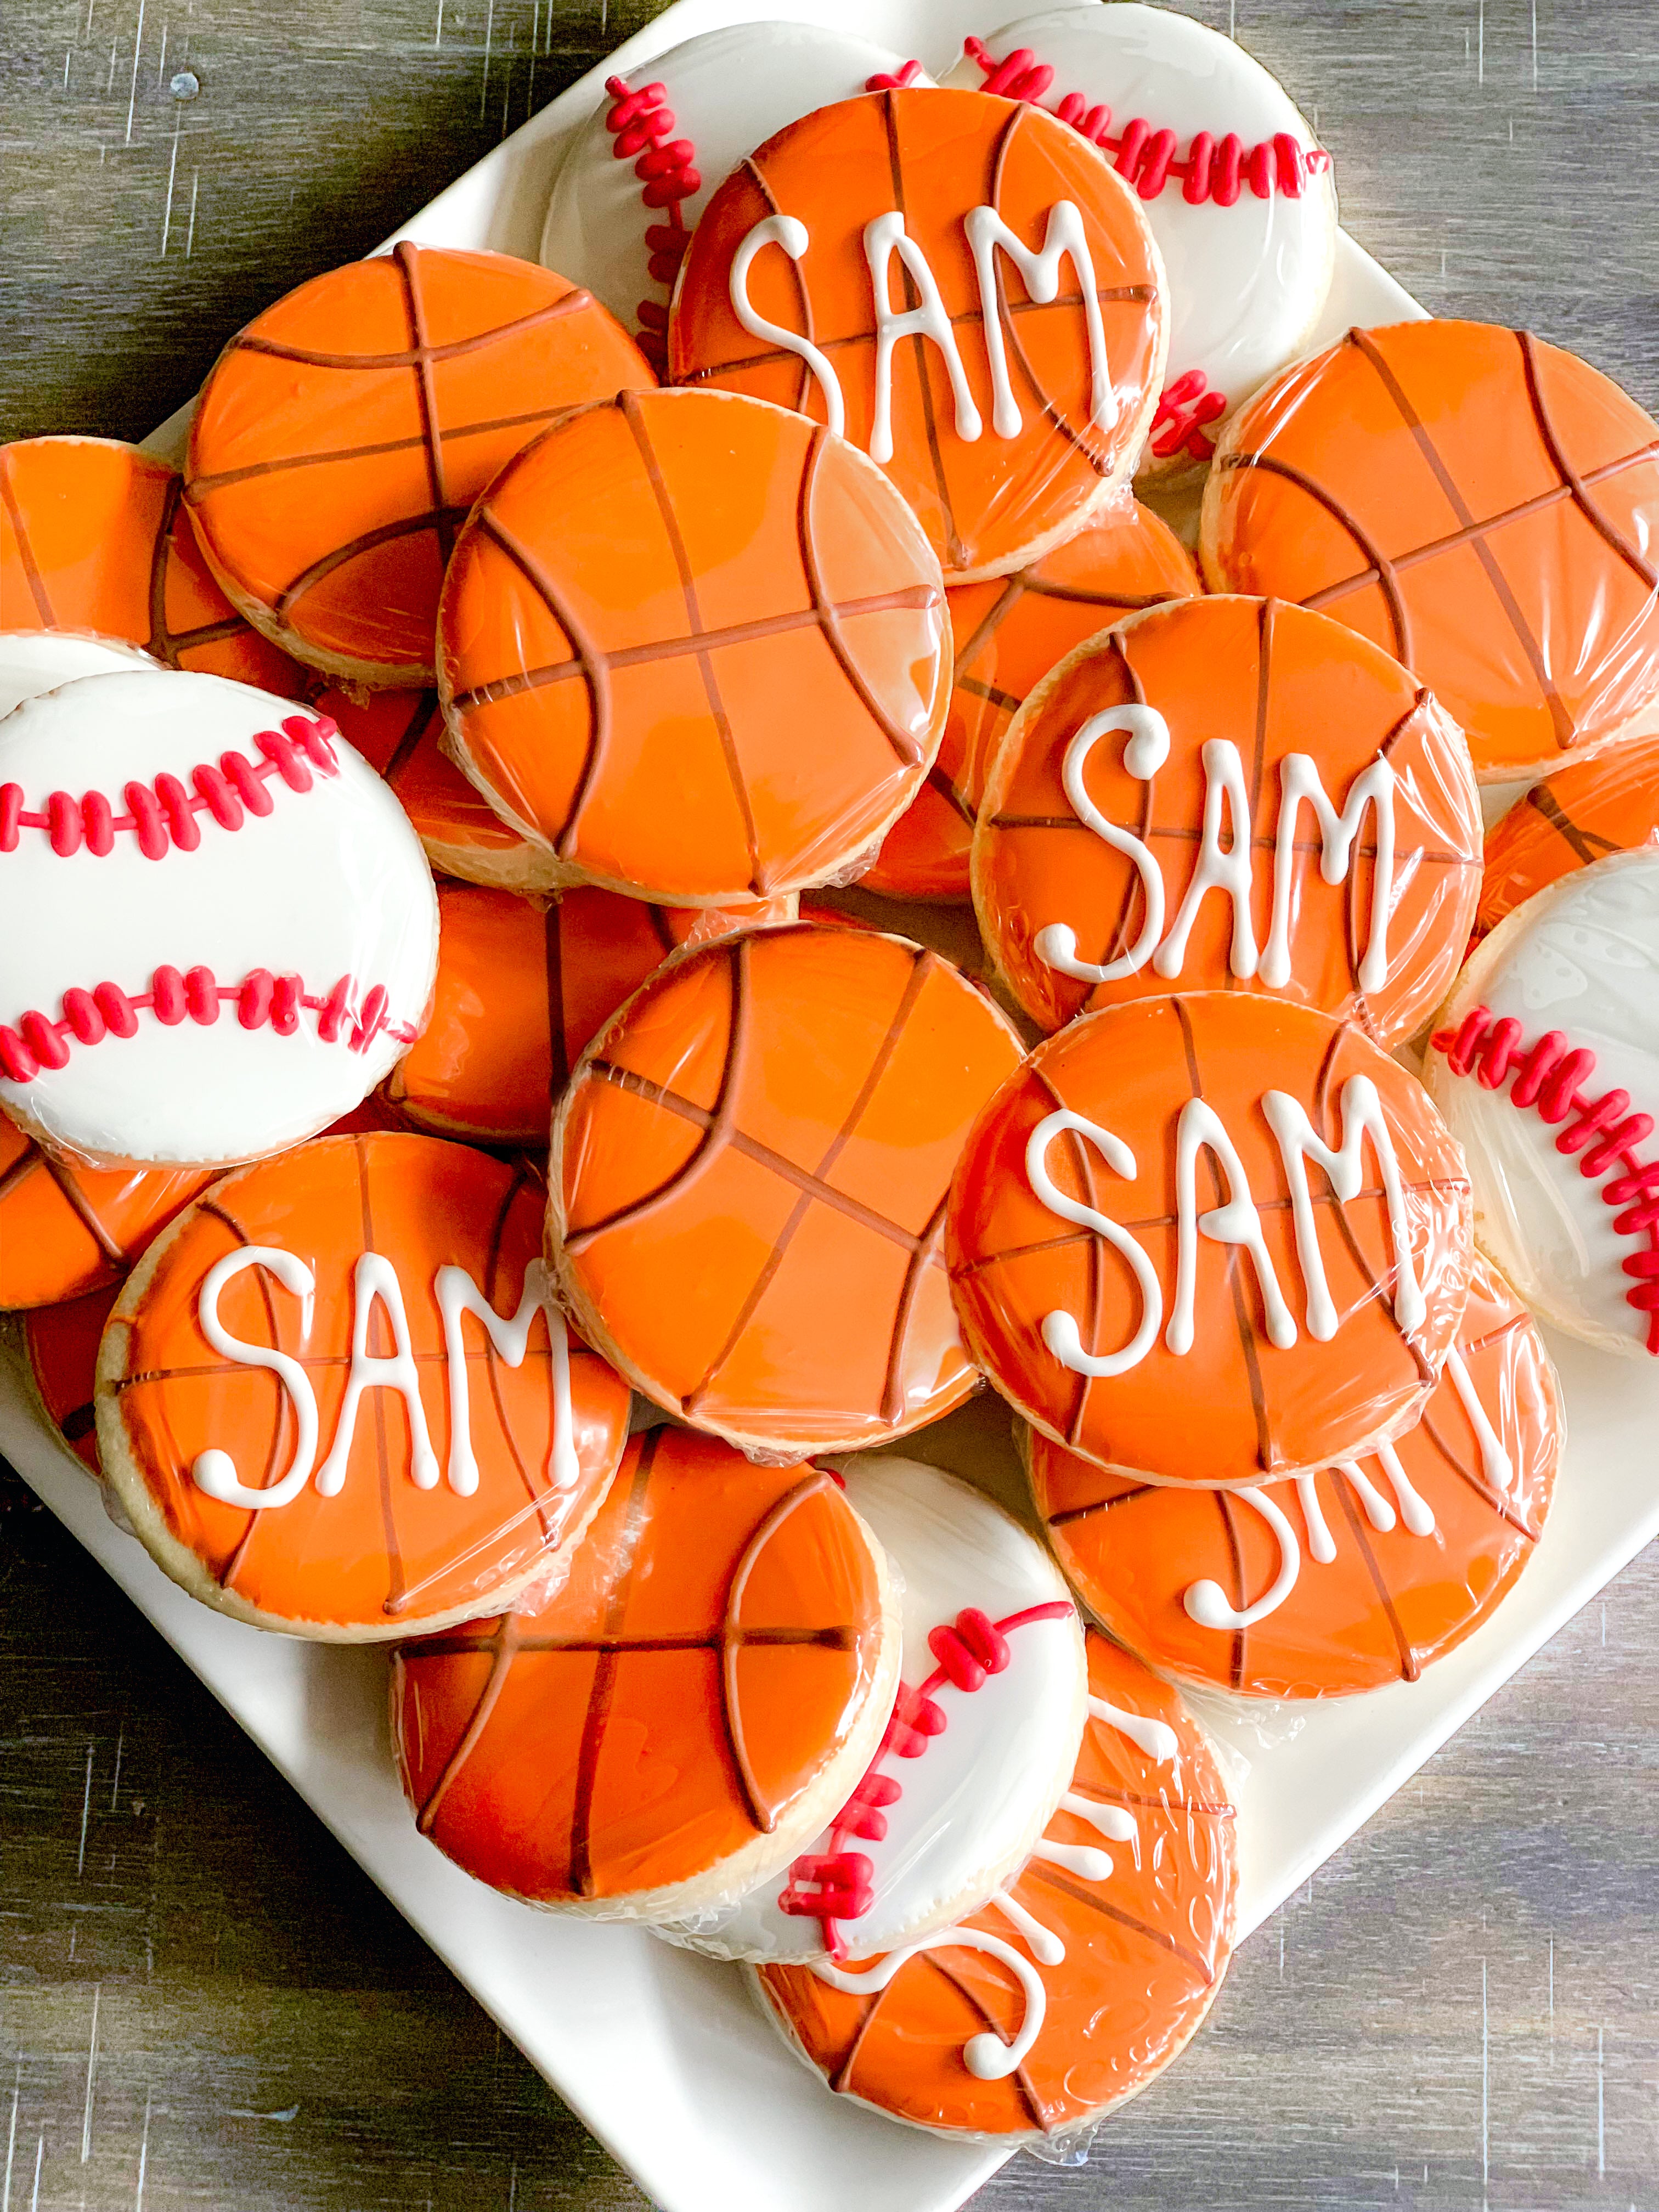 Sports cookies for Sam